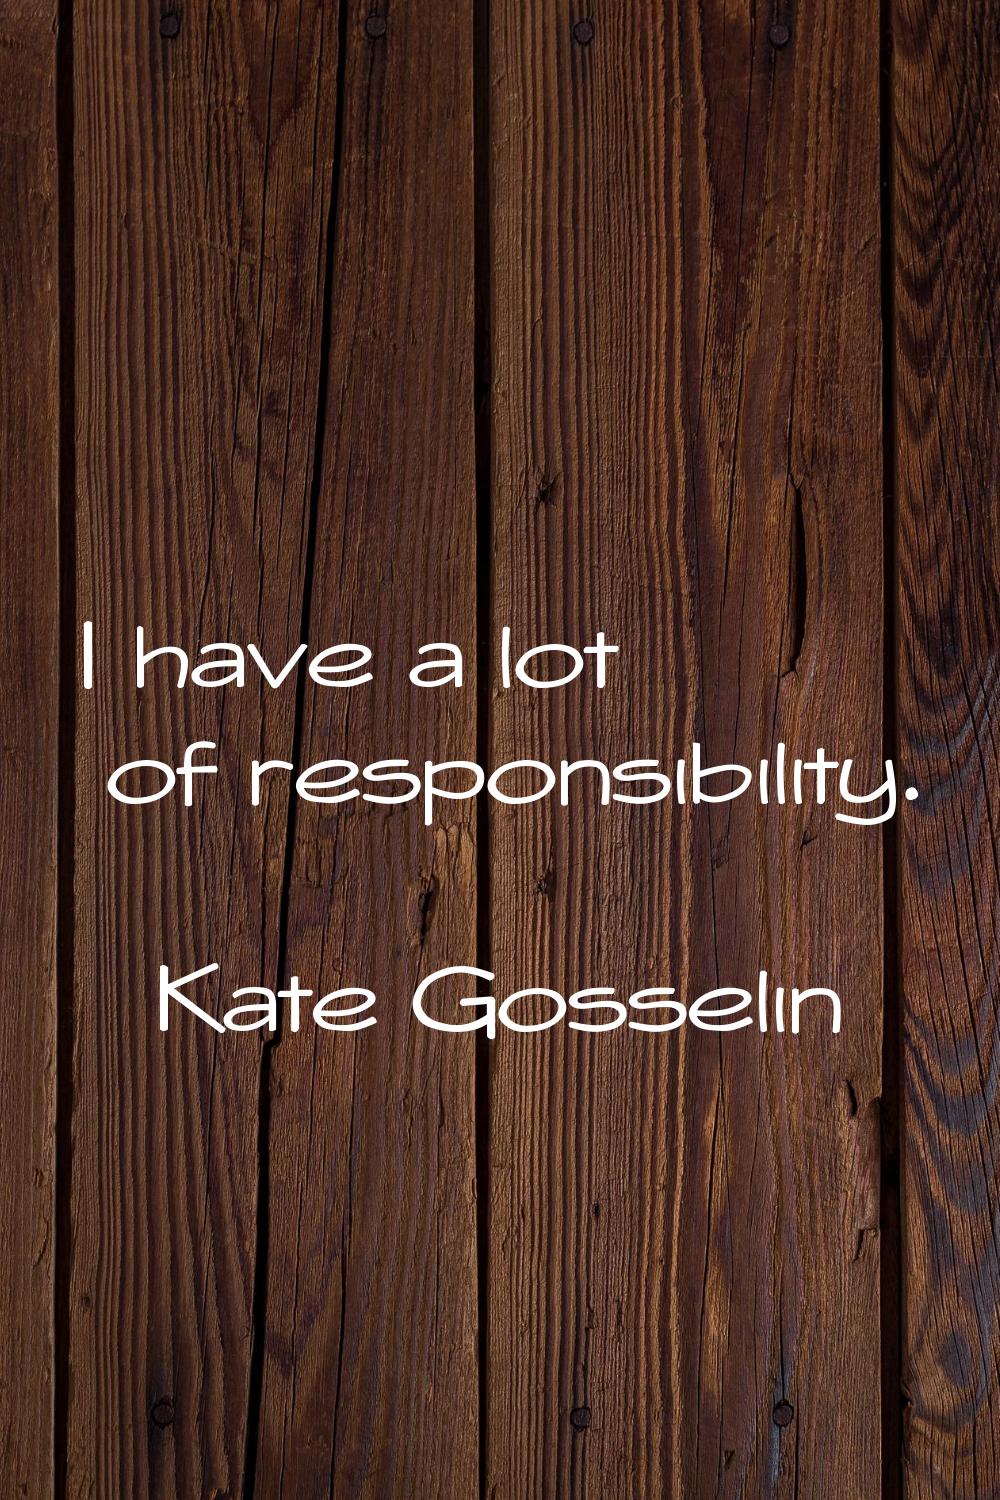 I have a lot of responsibility.